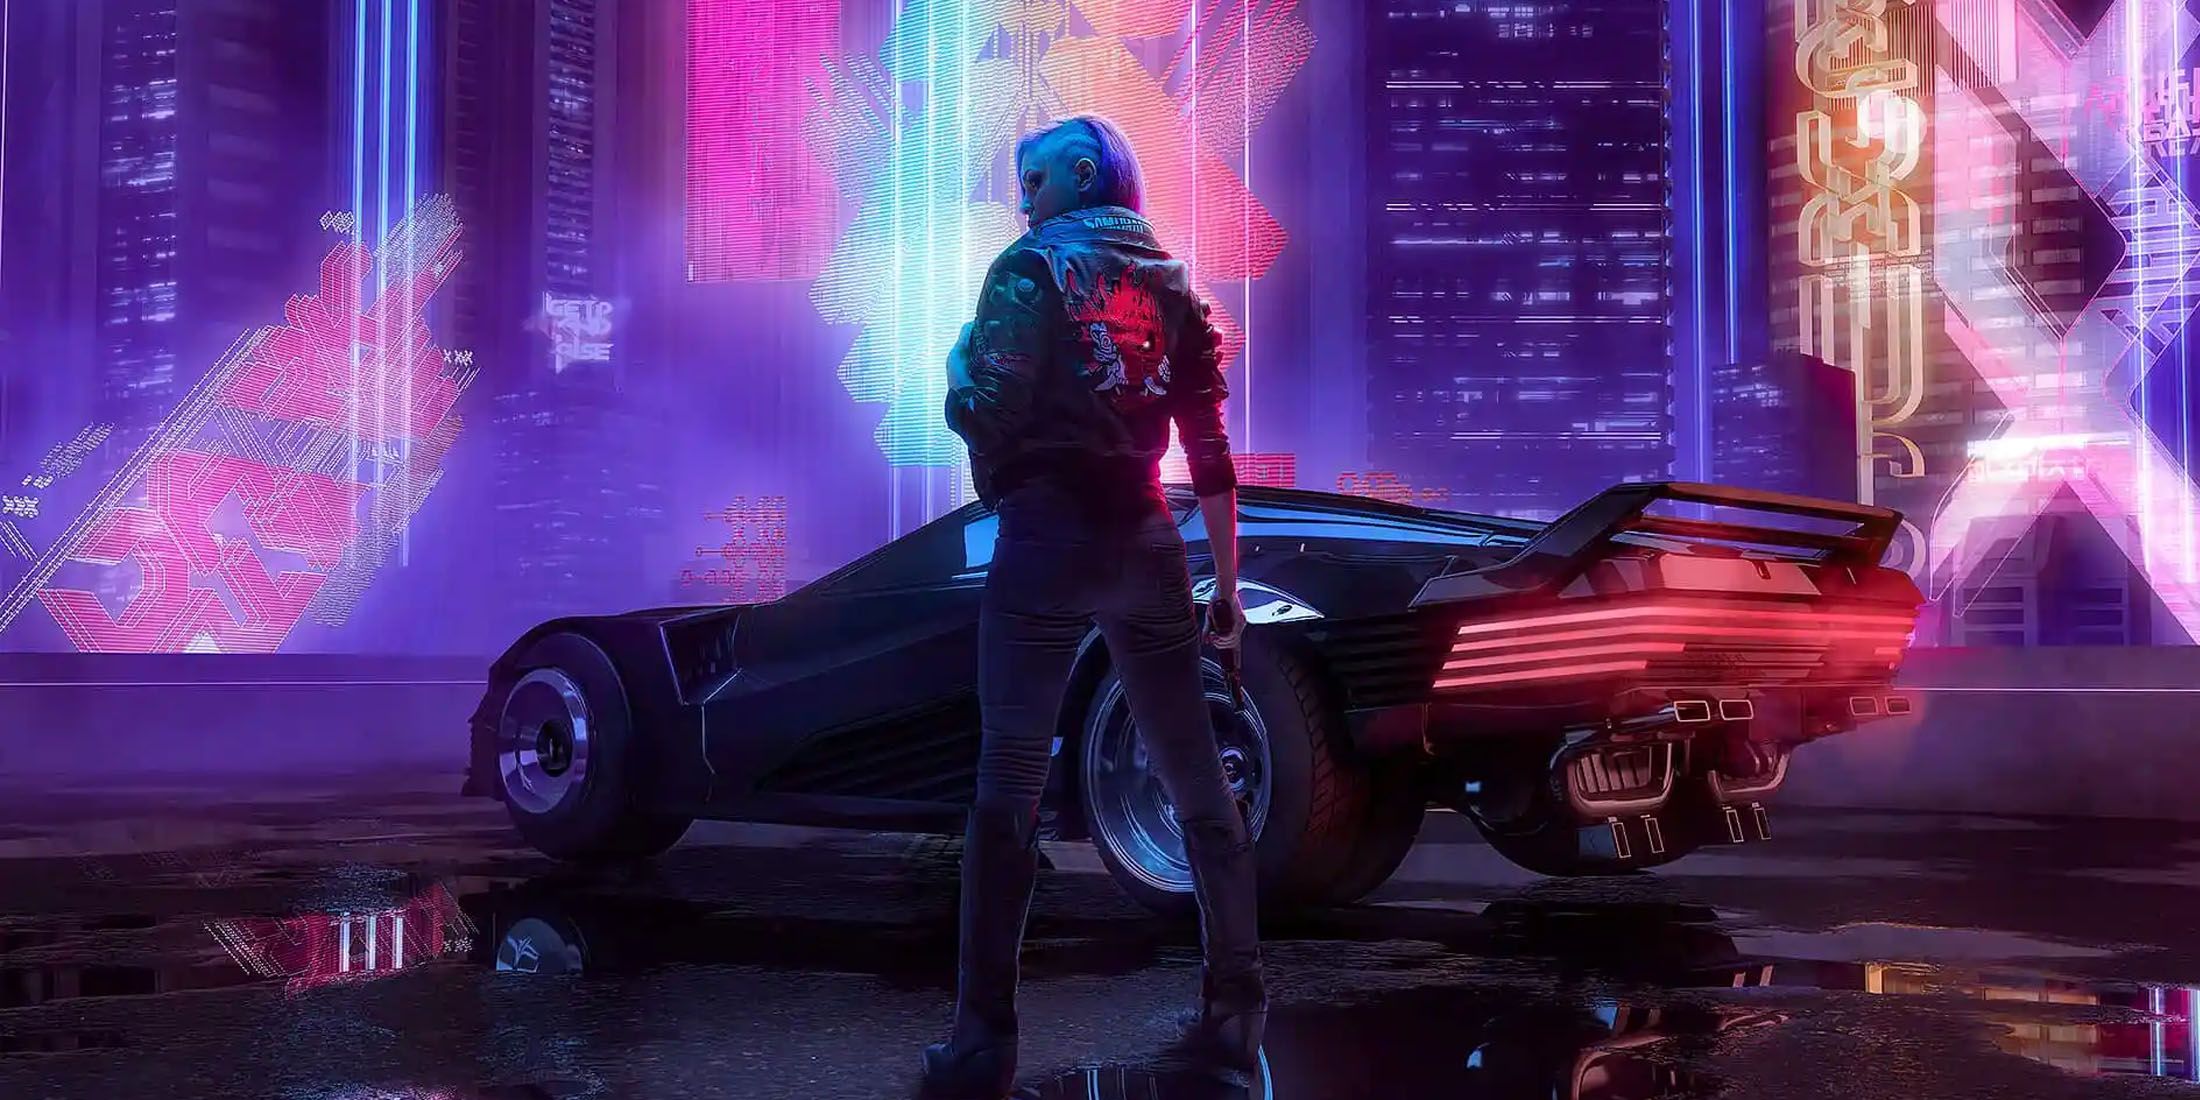 A screenshot of a female V standing in front of a car in the dark, neon-lit Night City in Cyberpunk 2077.